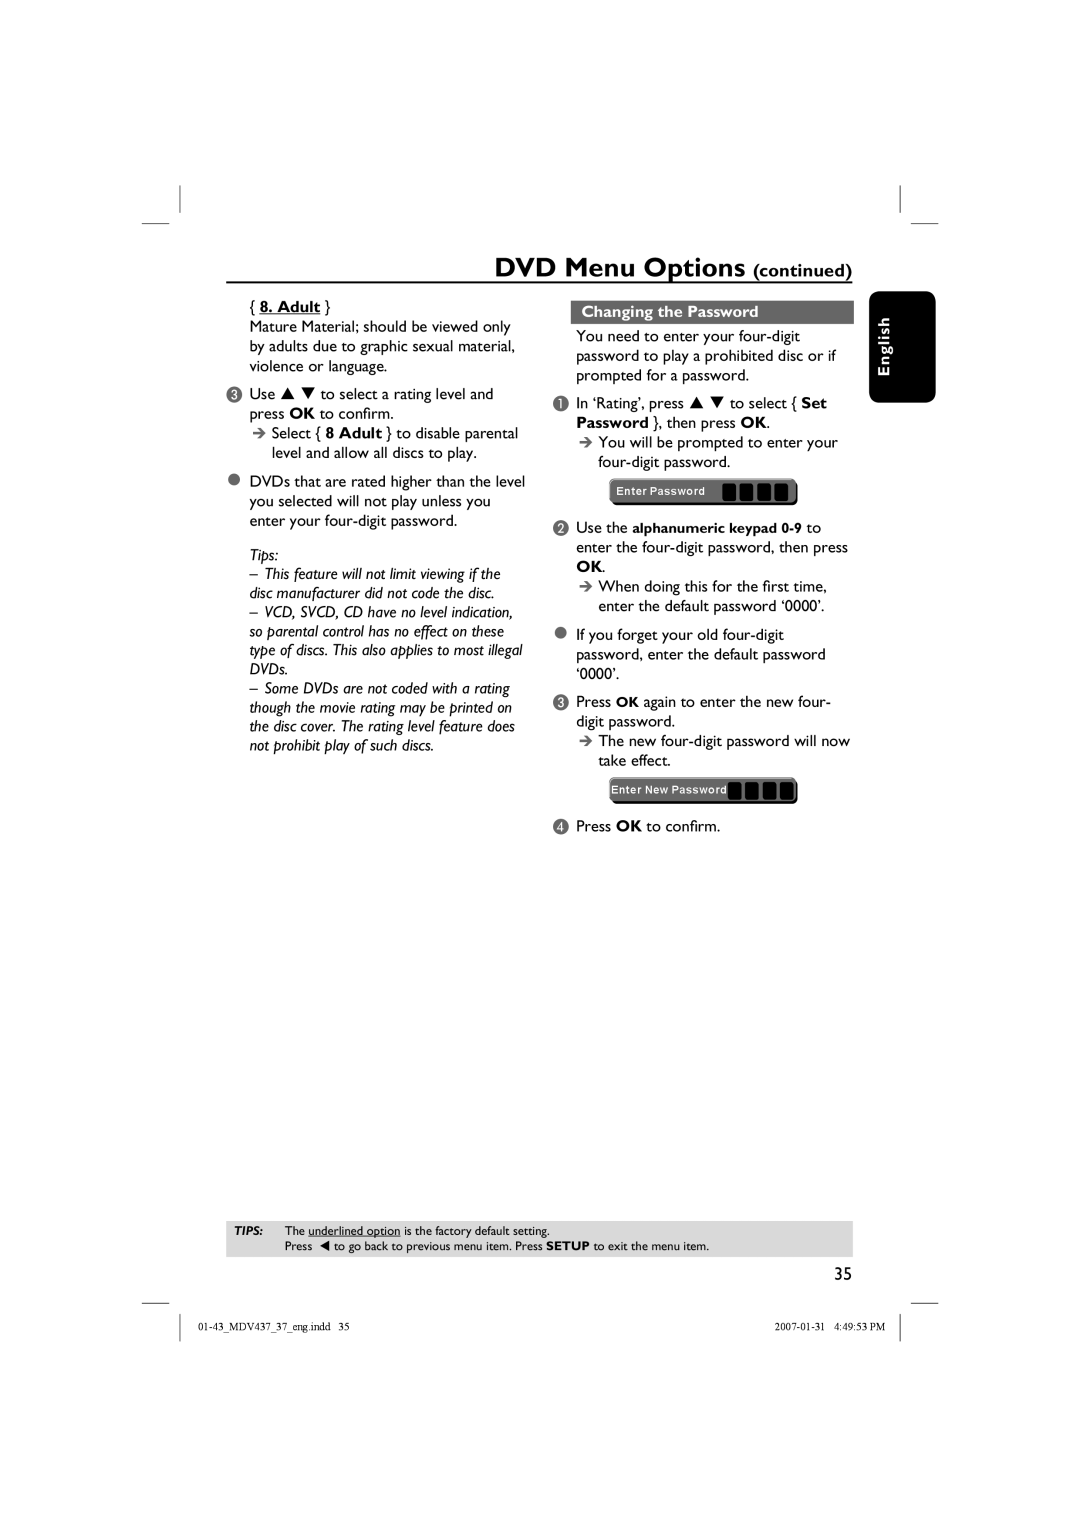 Magnavox MDV437 manual Adult, Changing the Password, DVD Menu Options continued, Tips, English 